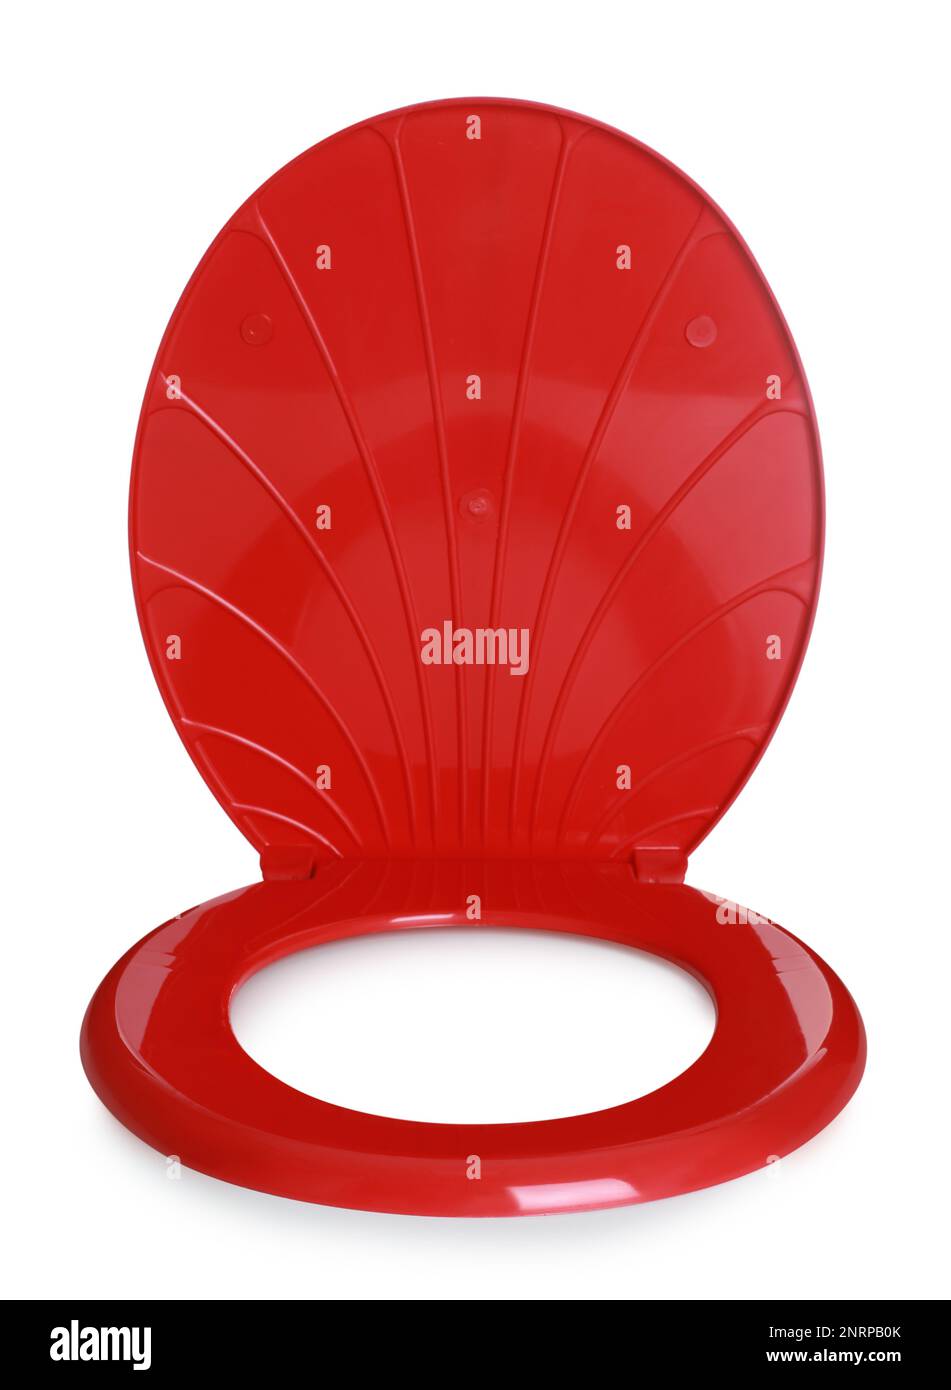 New red plastic toilet seat isolated on white Stock Photo